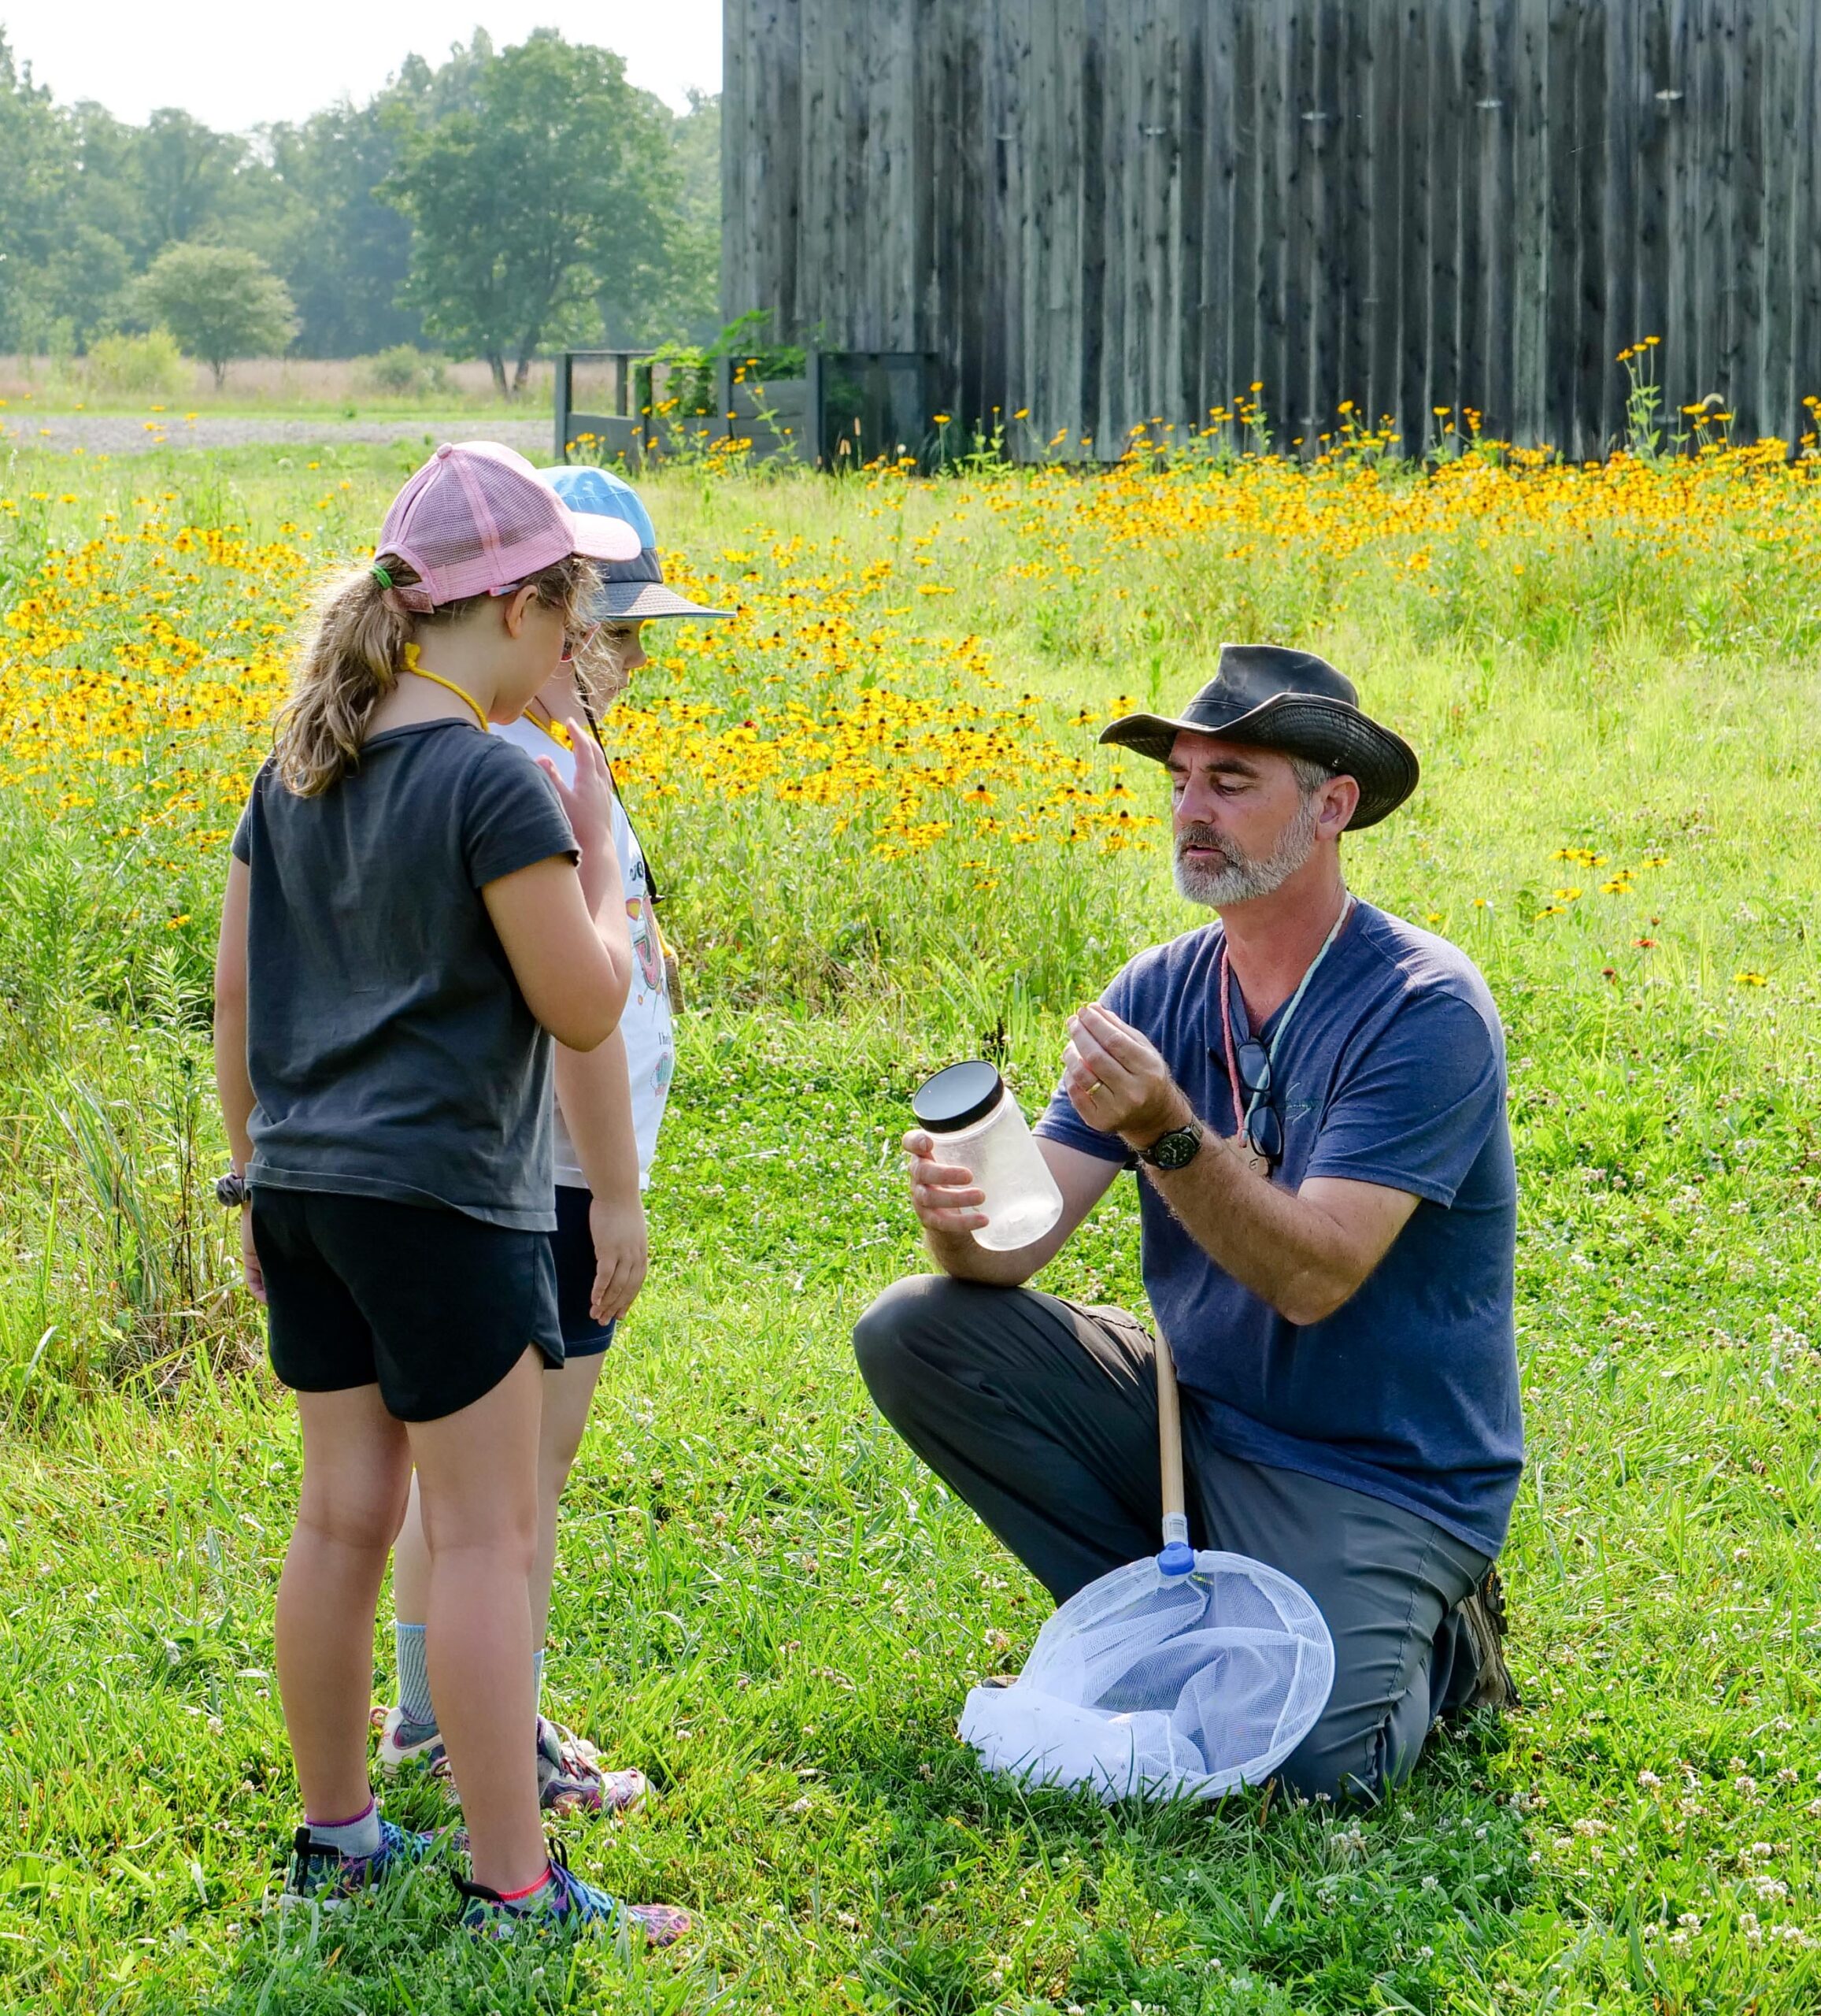 Greenacres educator and Lewis Township site supervisor, Joe Phelps teaching two young students about bugs in the field